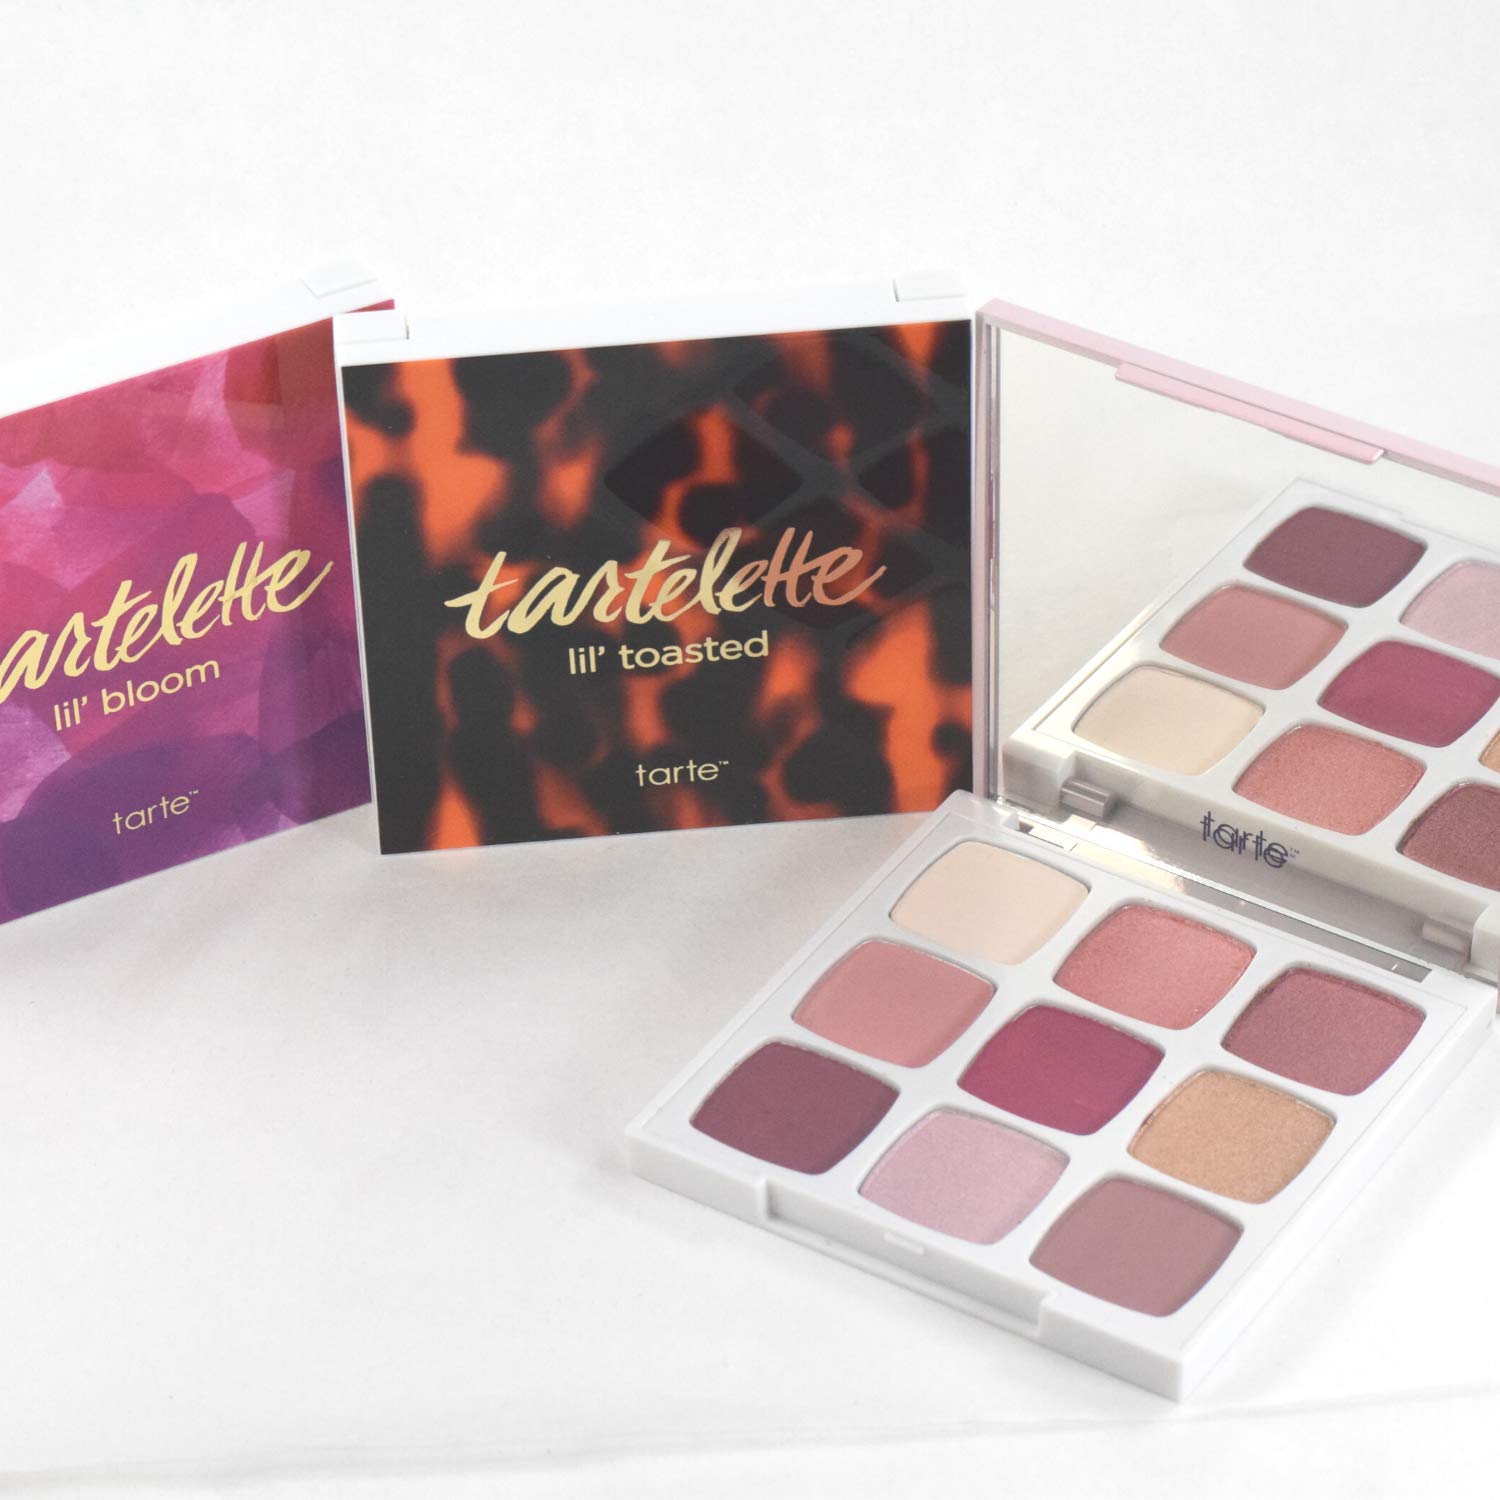  Tarte Cosmetics Tarte Tartelette Pro Eyeshadow Palette with Amazonian Clay, Holiday Makeup Trio Gift Set: lil bloom, lil toased, lil juicy